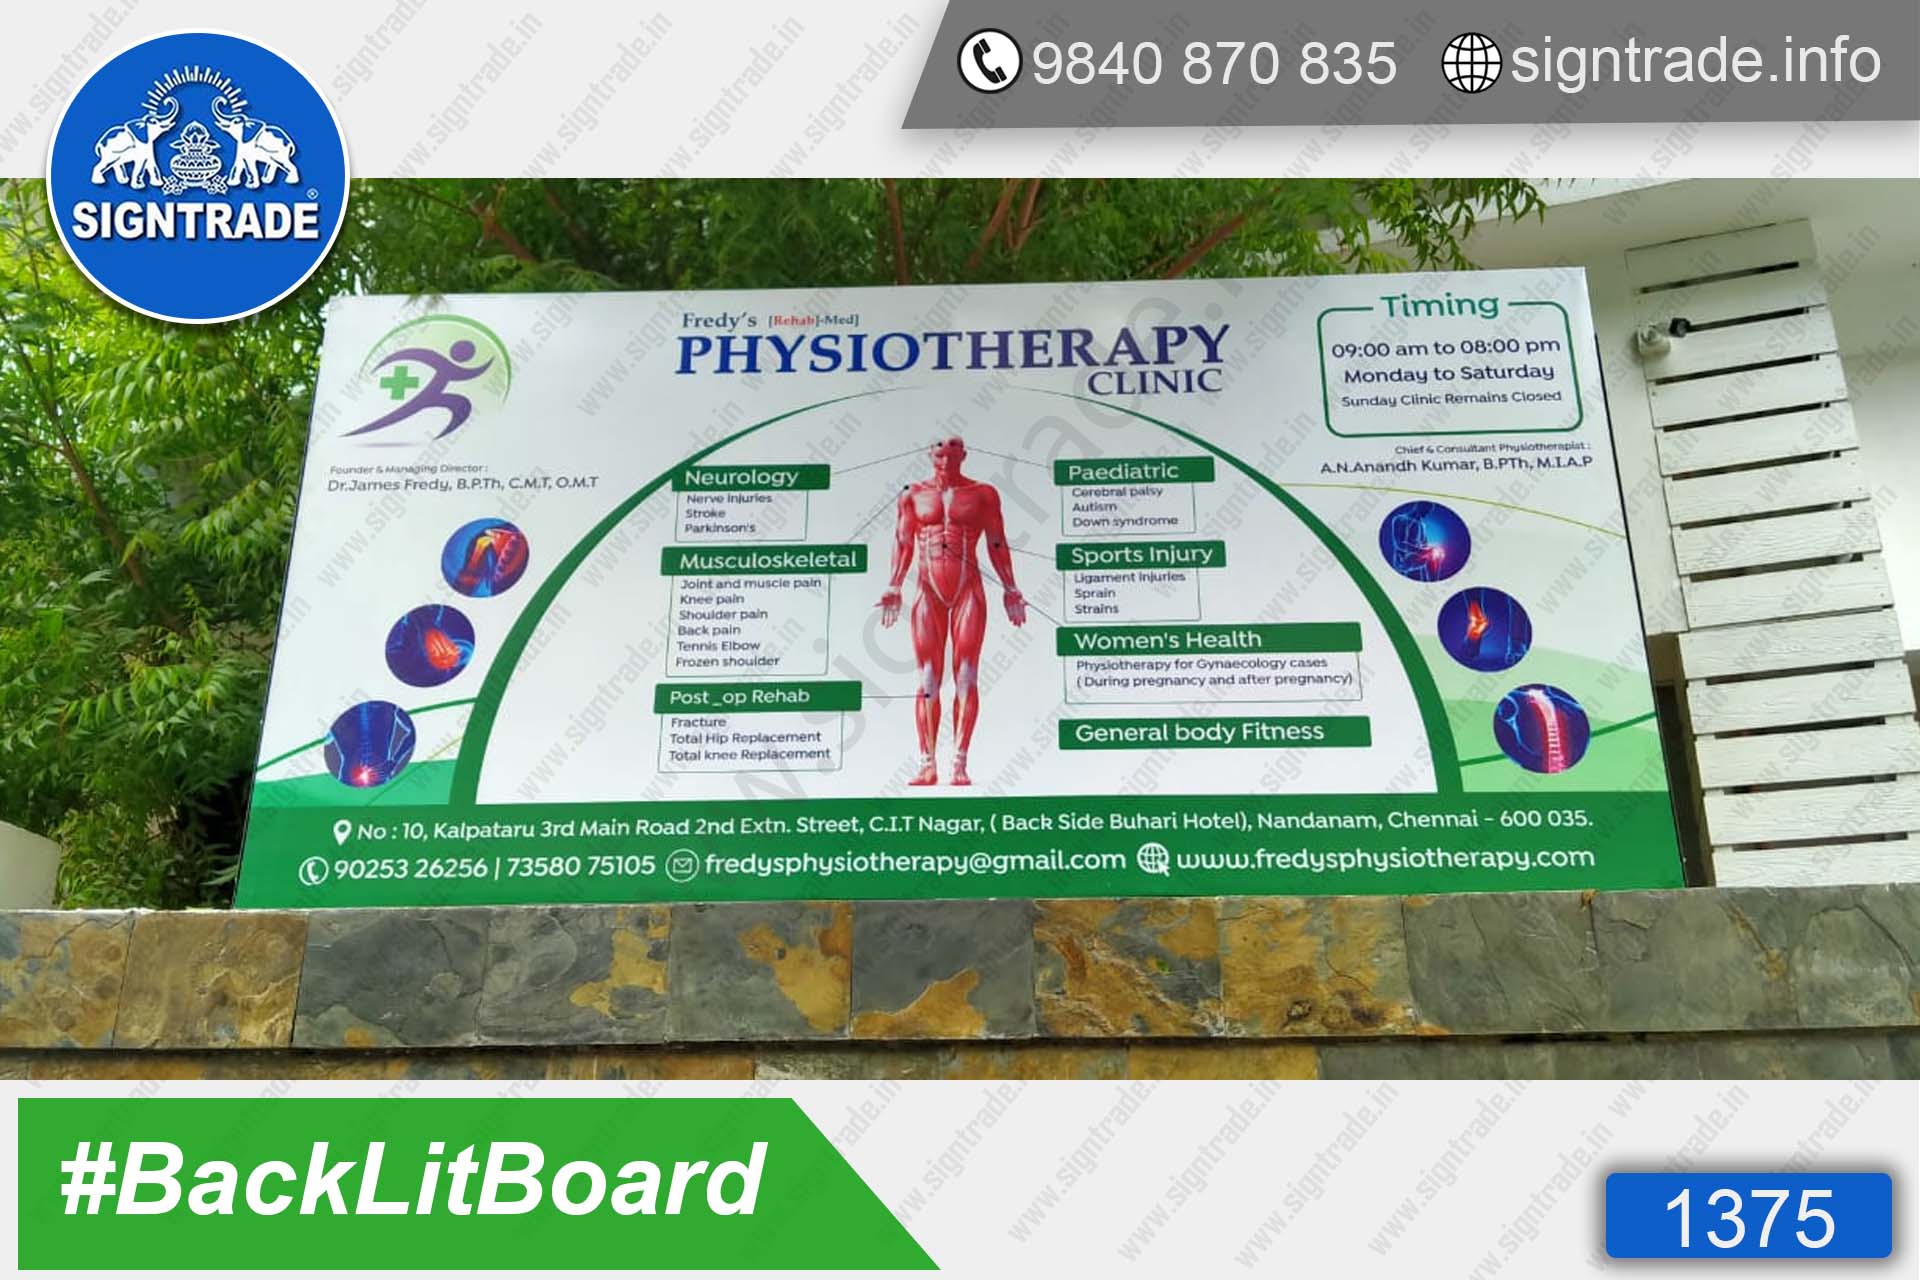 Physiotherapy Clinic - Chennai - SIGNTRADE - Backlit Flex Board - Digital Printing Services in Chennai